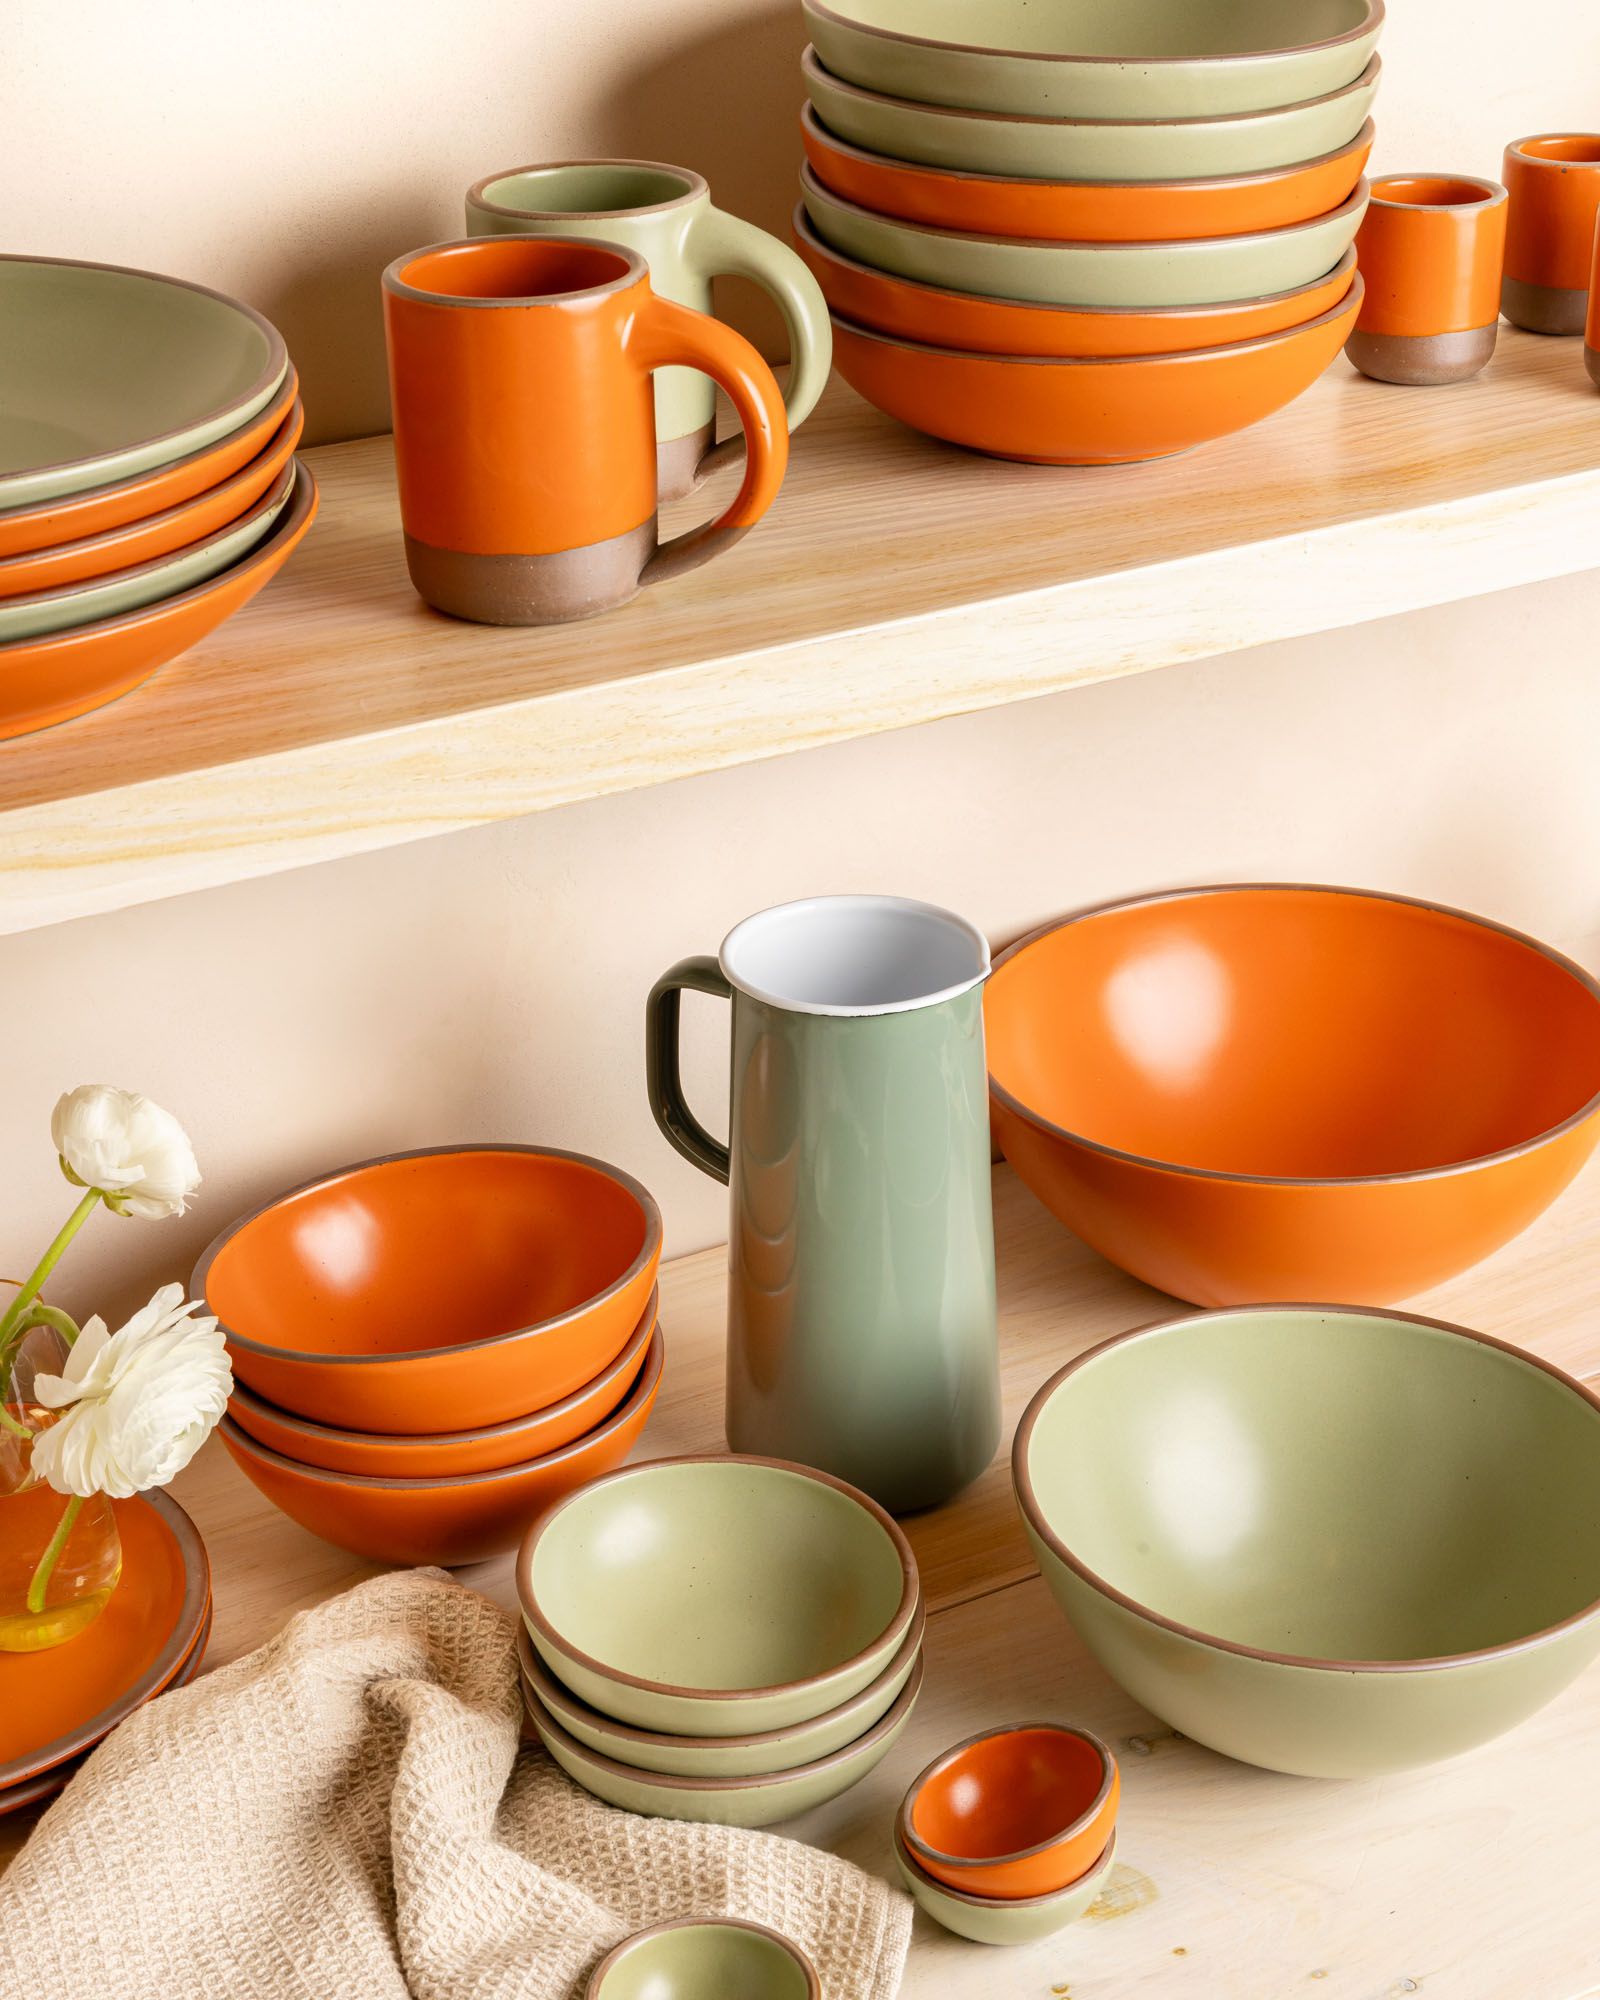 In a kitchen, stacks of ceramic pottery in bold orange and sage green colors, surrounded by a sage green pitcher, flowers, and a kitchen towel.